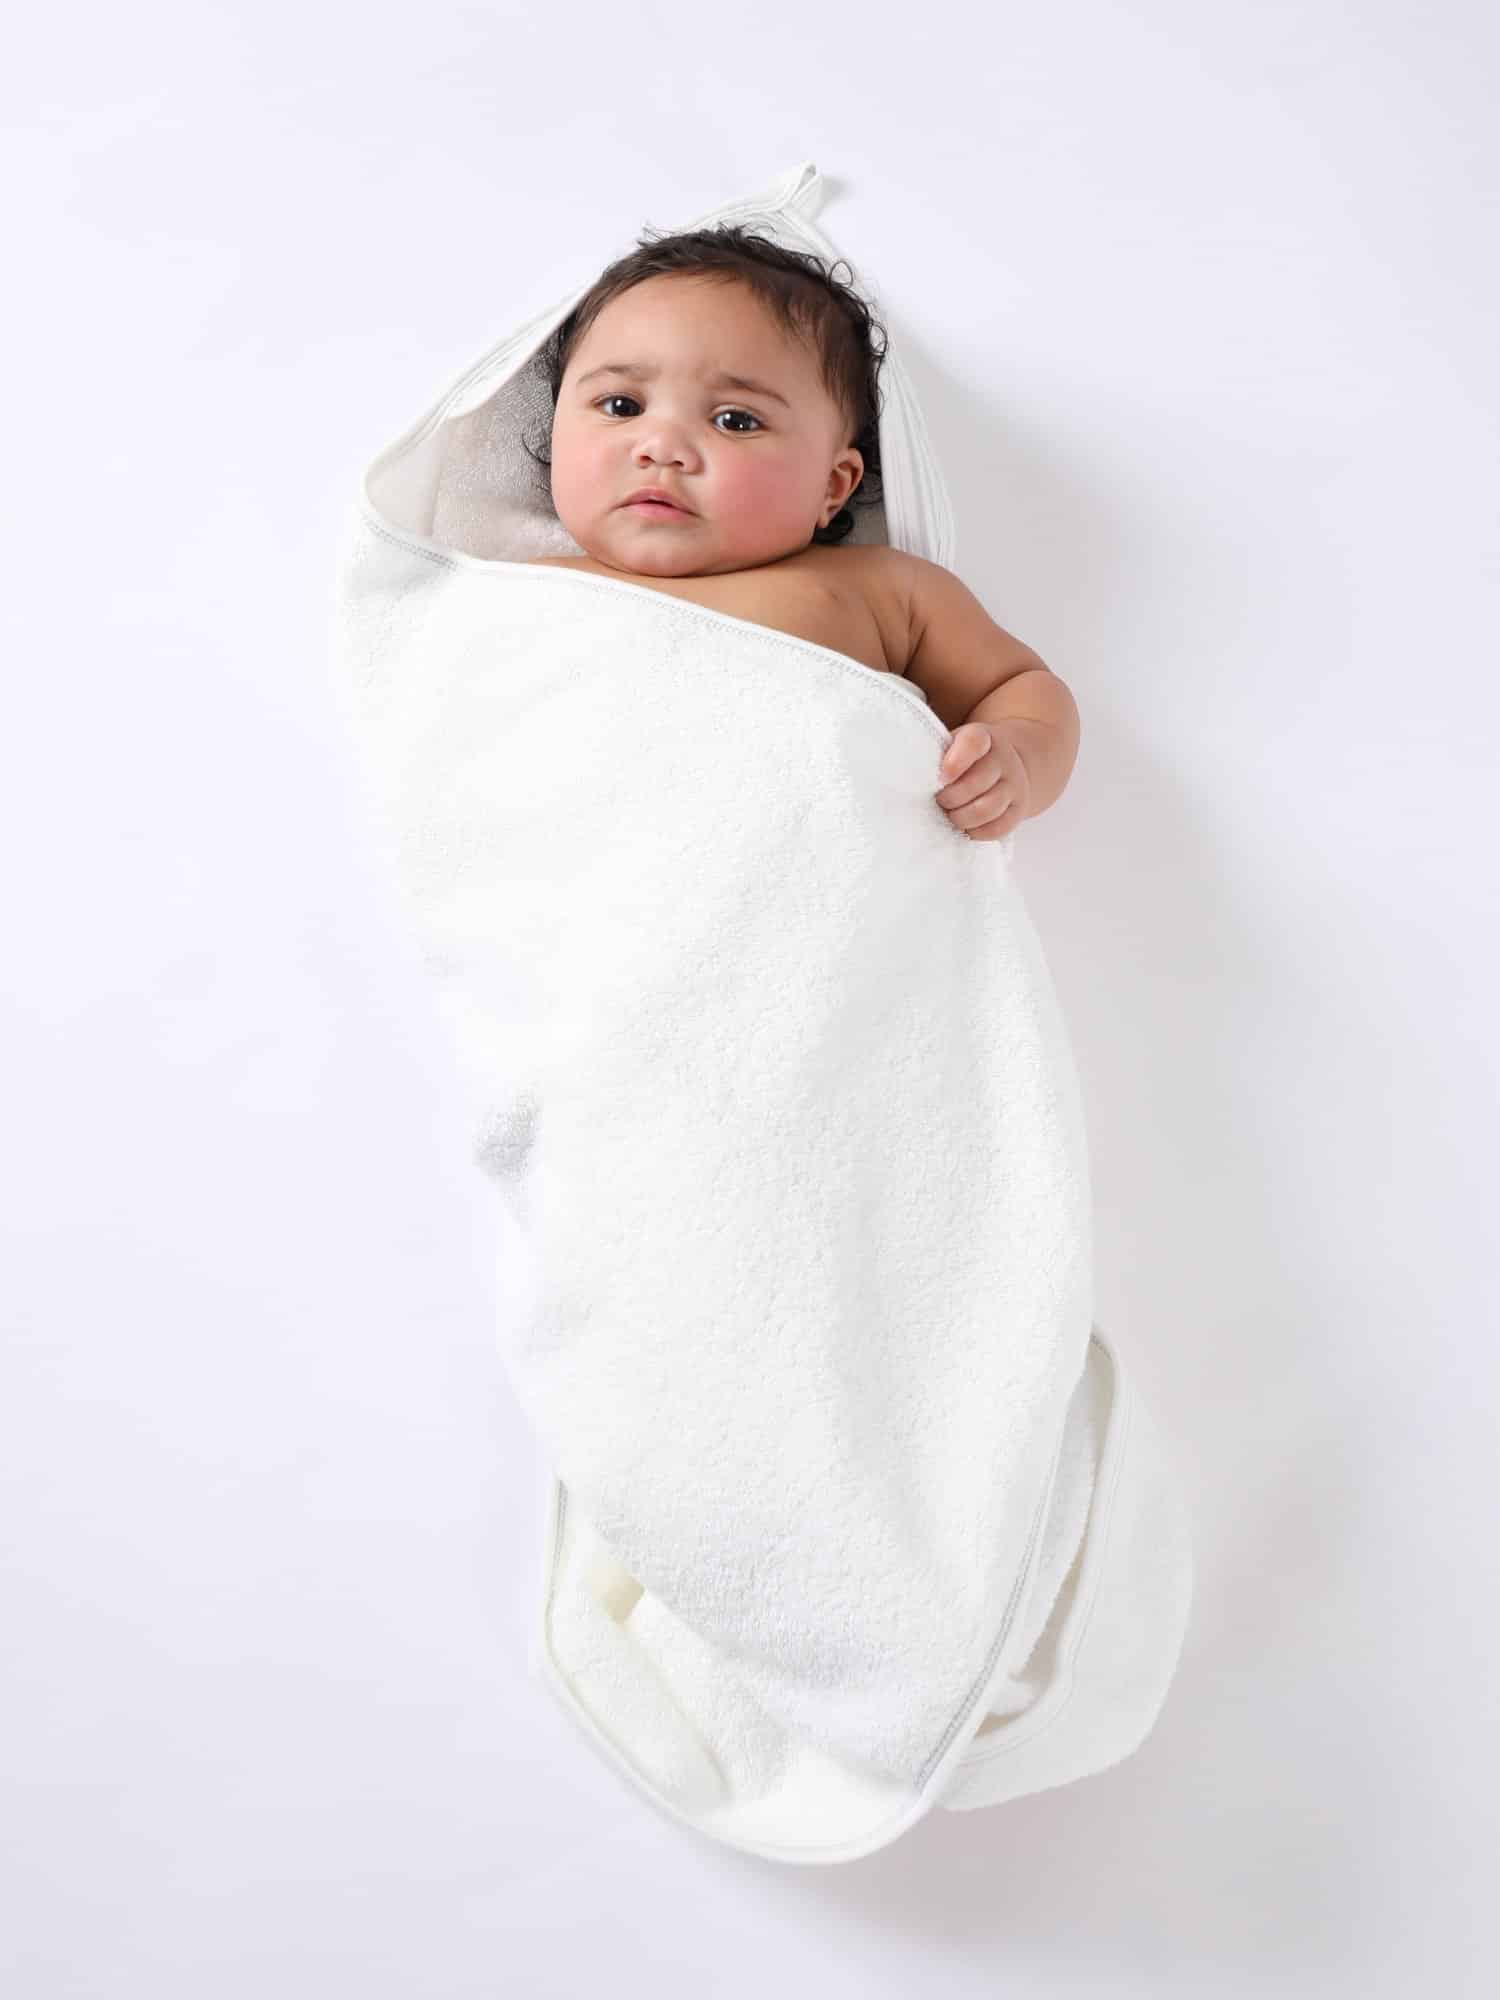 Under the Nile Newborn Deluxe Hooded Towel - Gray Stripe from gimme the good stuff